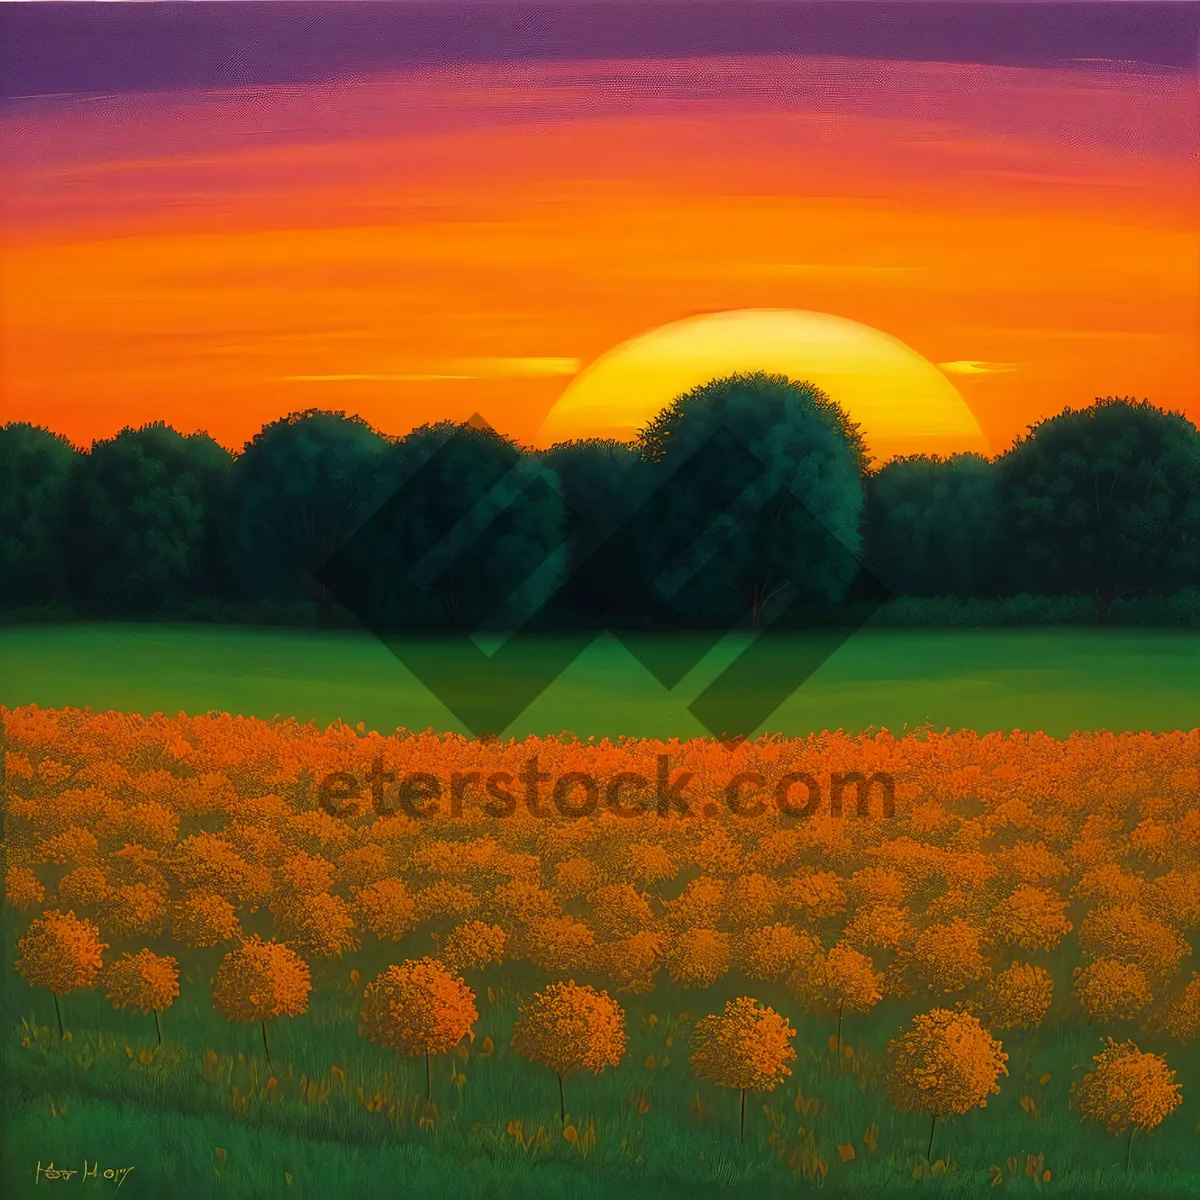 Picture of Idyllic Rural Landscape with Colorful Pumpkin Patch